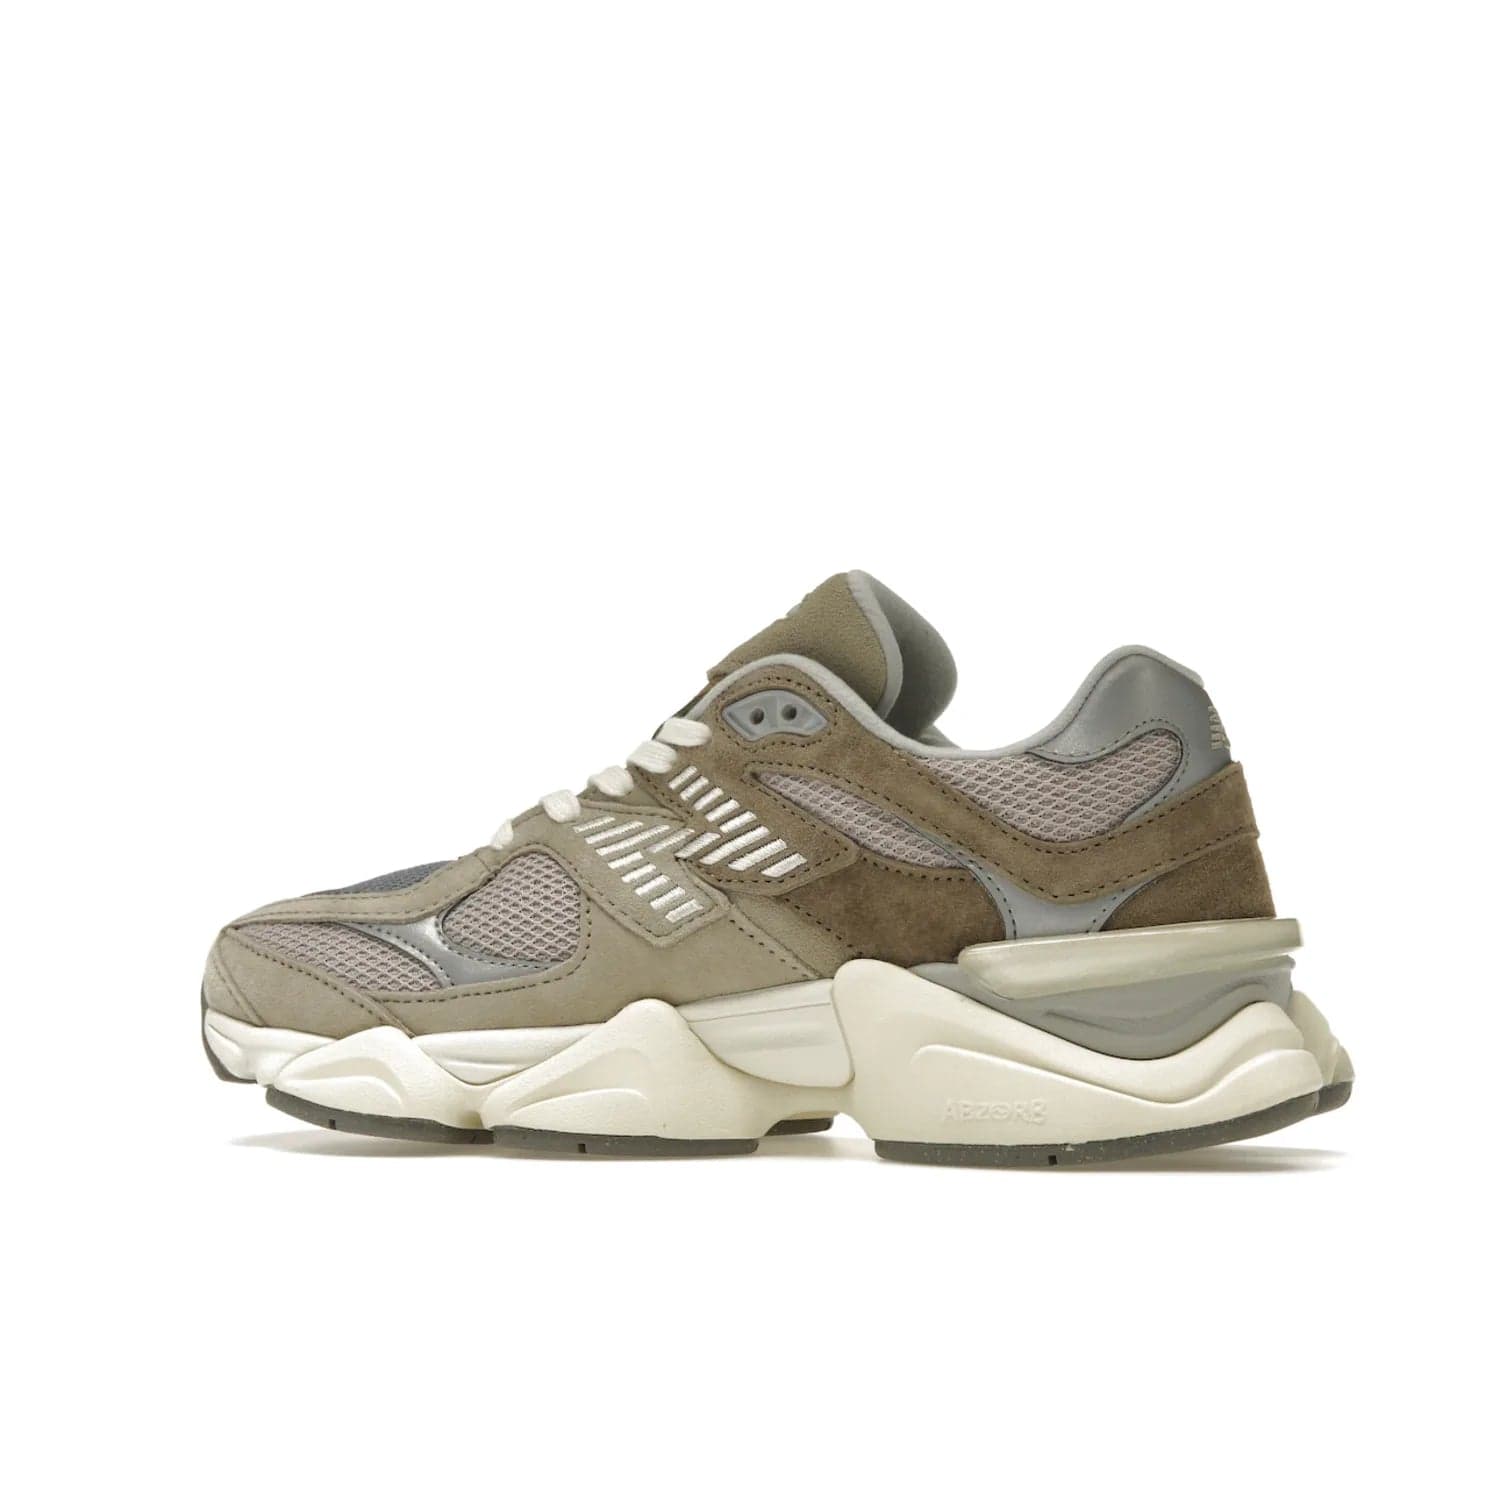 New Balance 9060 Mushroom - Image 21 - Only at www.BallersClubKickz.com - Get the New Balance 9060 Mushroom in stylish aluminum and mushroom tones. Featuring a porous mesh fabric with multiple suede overlays, a grey N symbol and rugged off-white/grey sole. Shop now and make a statement.